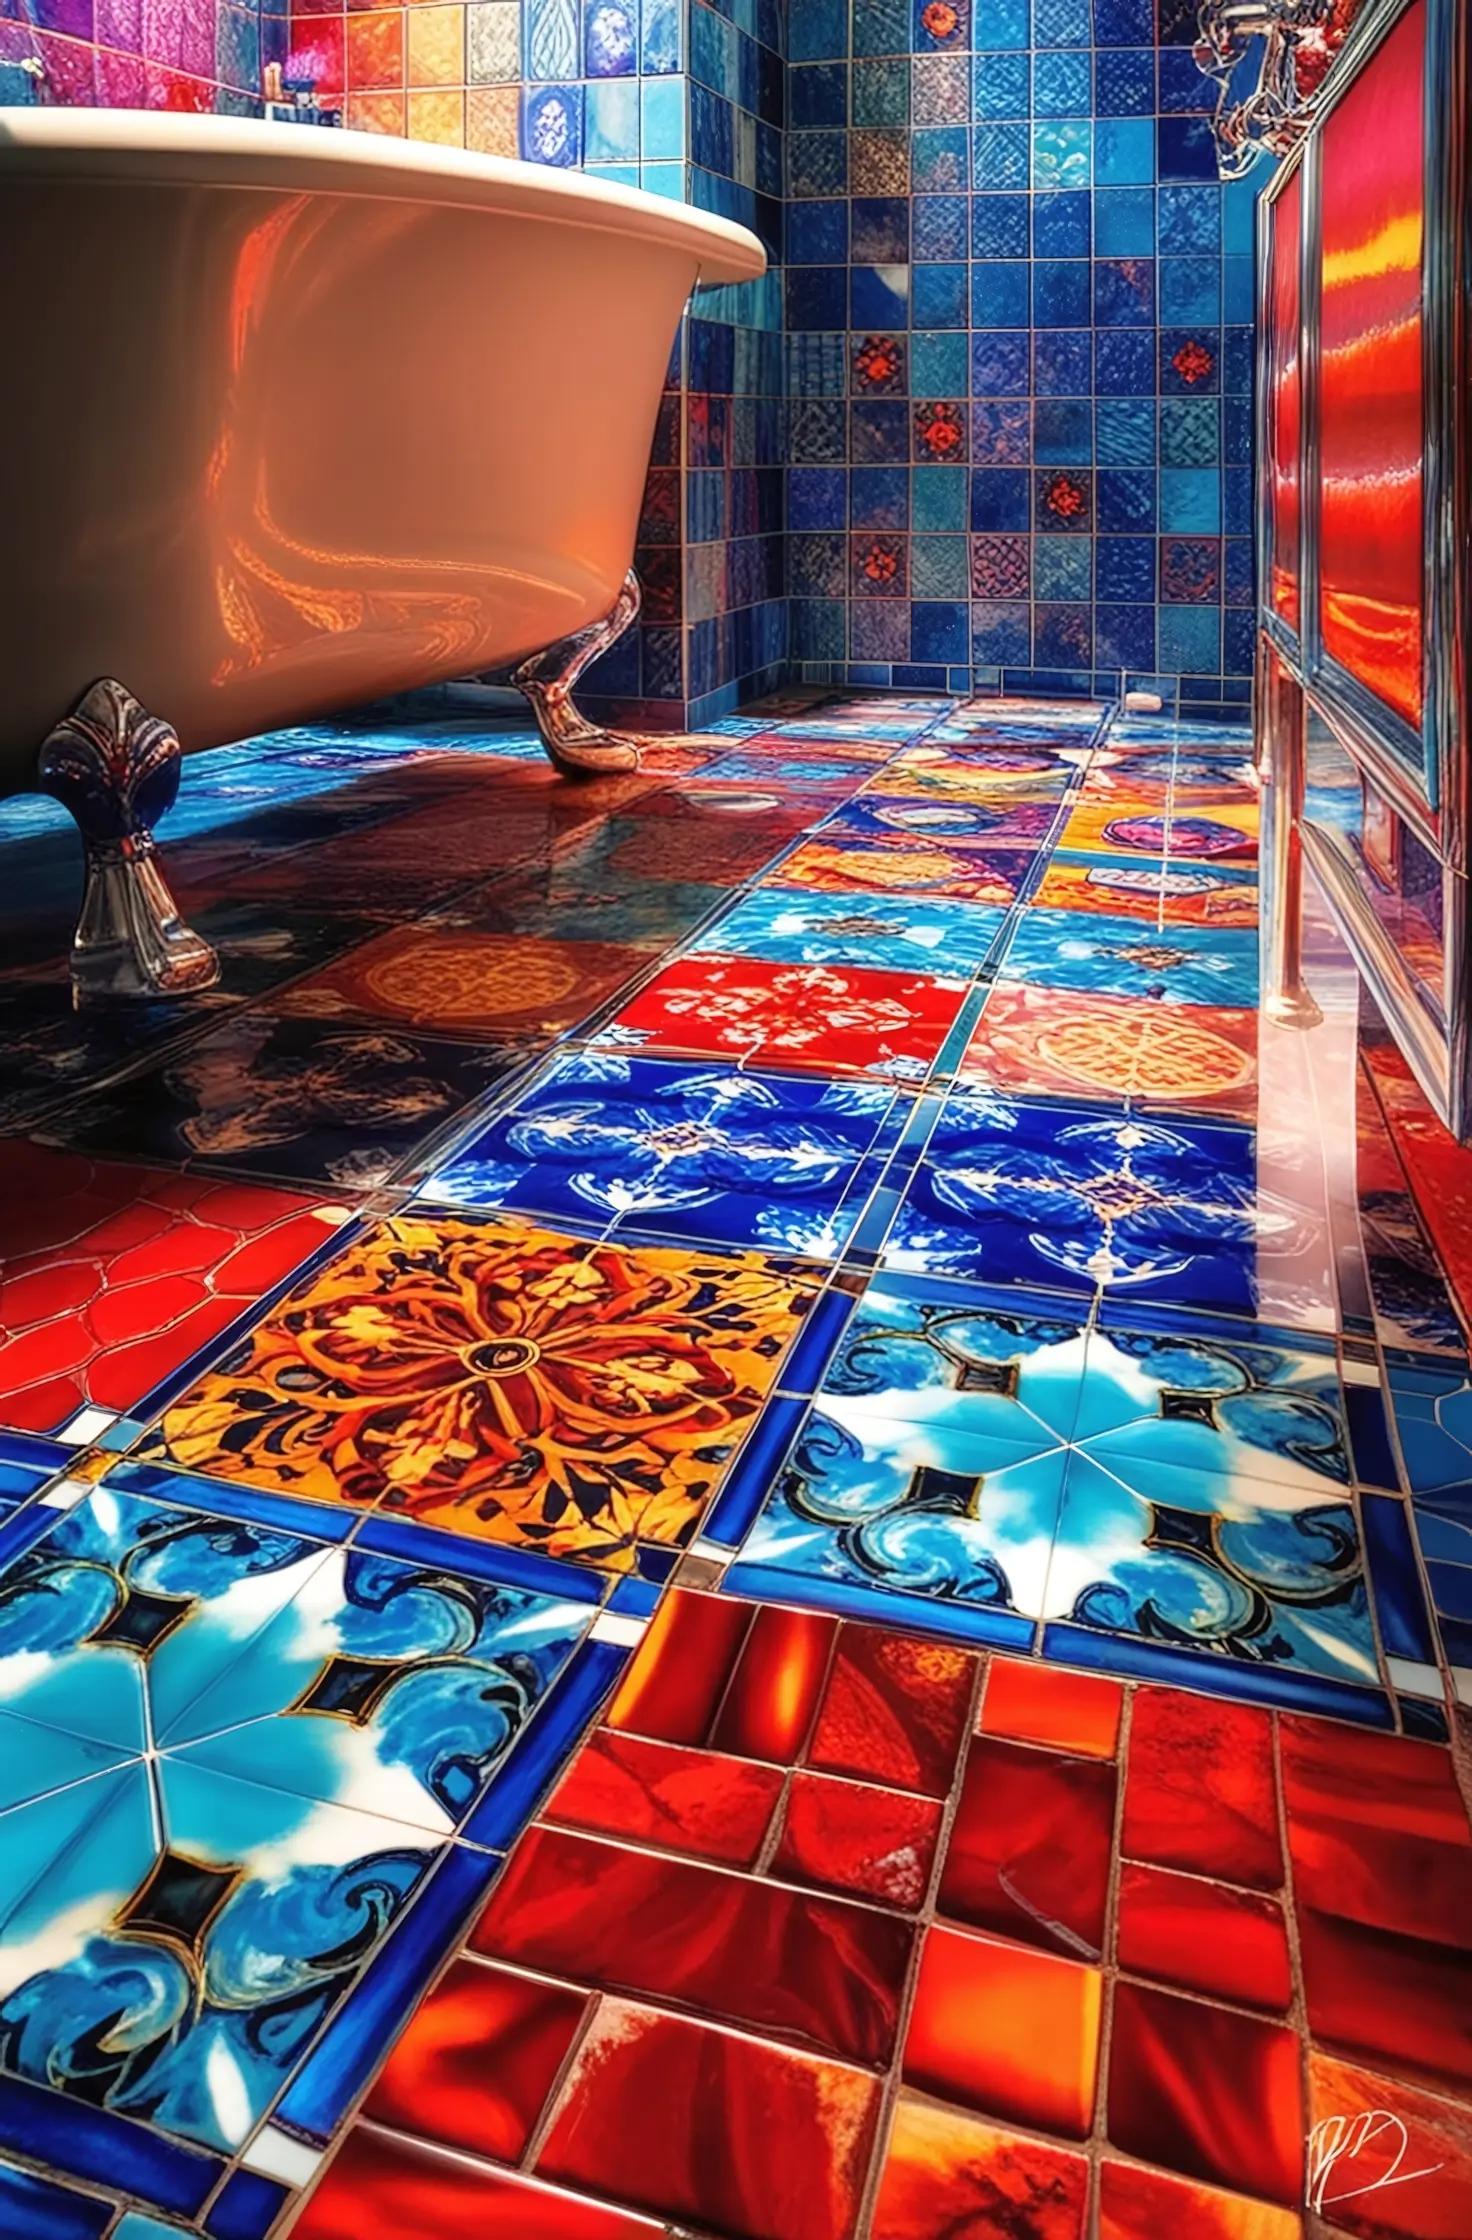 Bathroom with floor tiles in various vibrant color schemes.